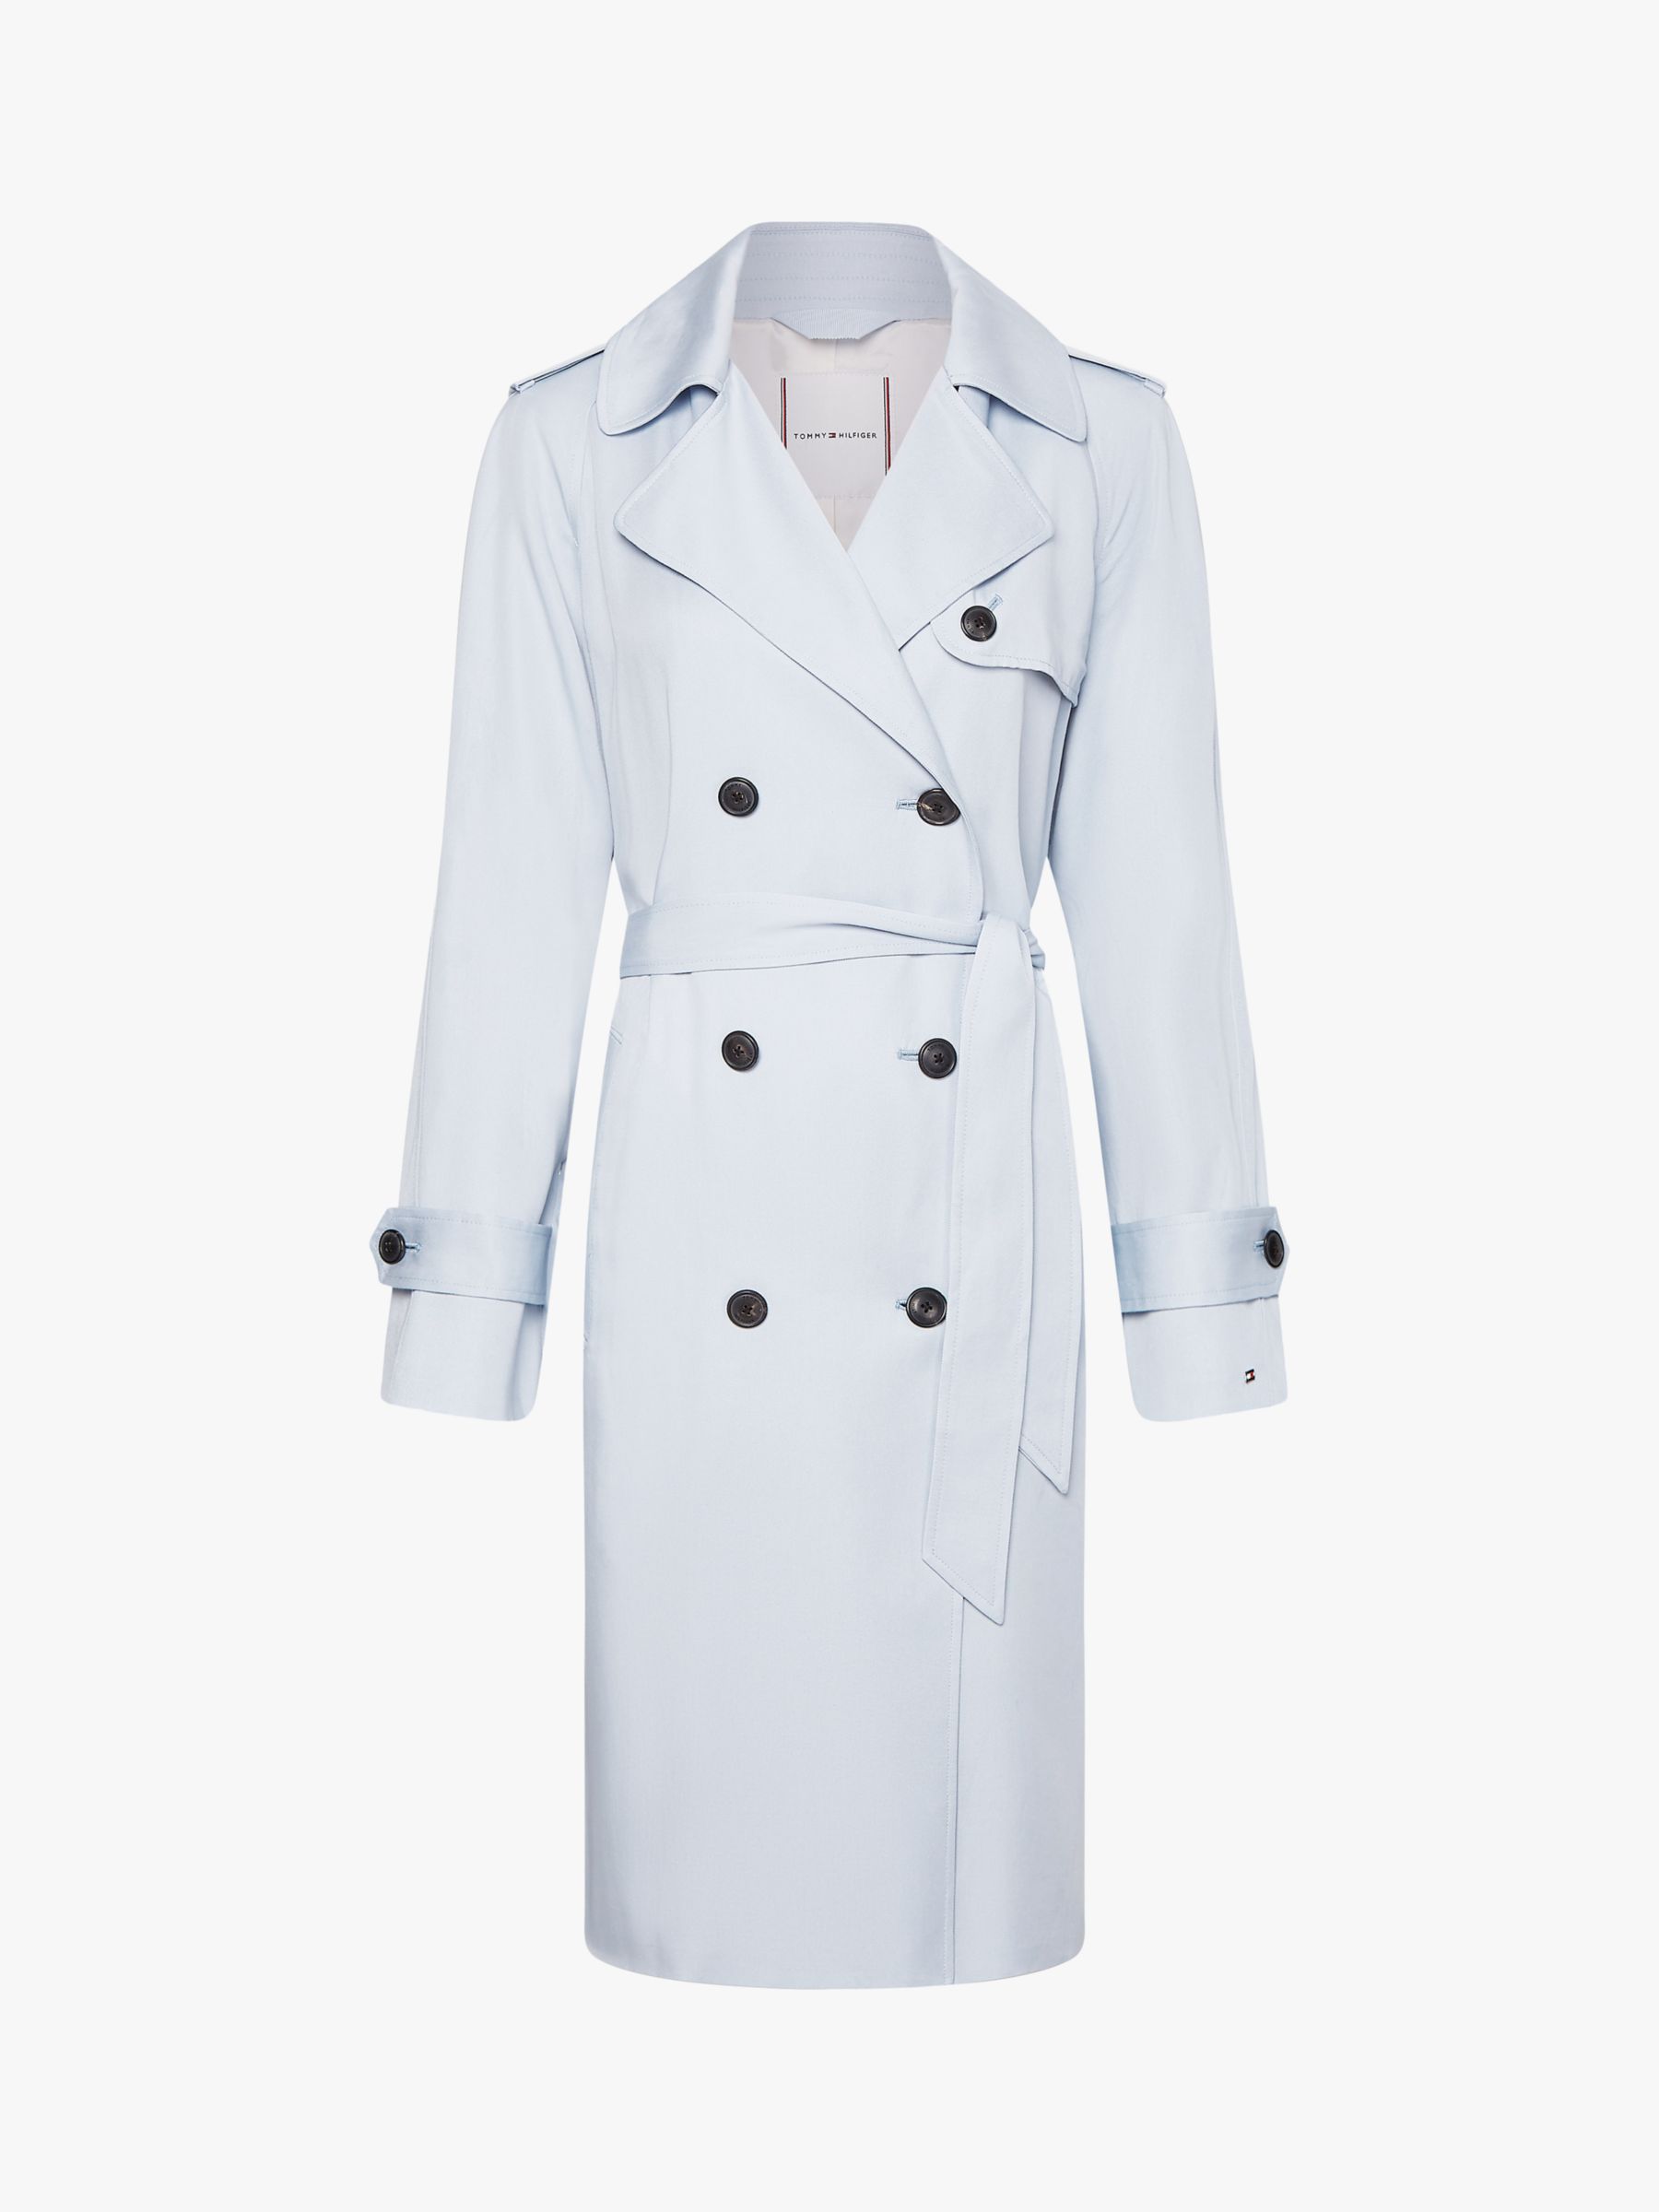 Tommy Hilfiger Double Breasted Trench Coat, Breezy Blue, 6